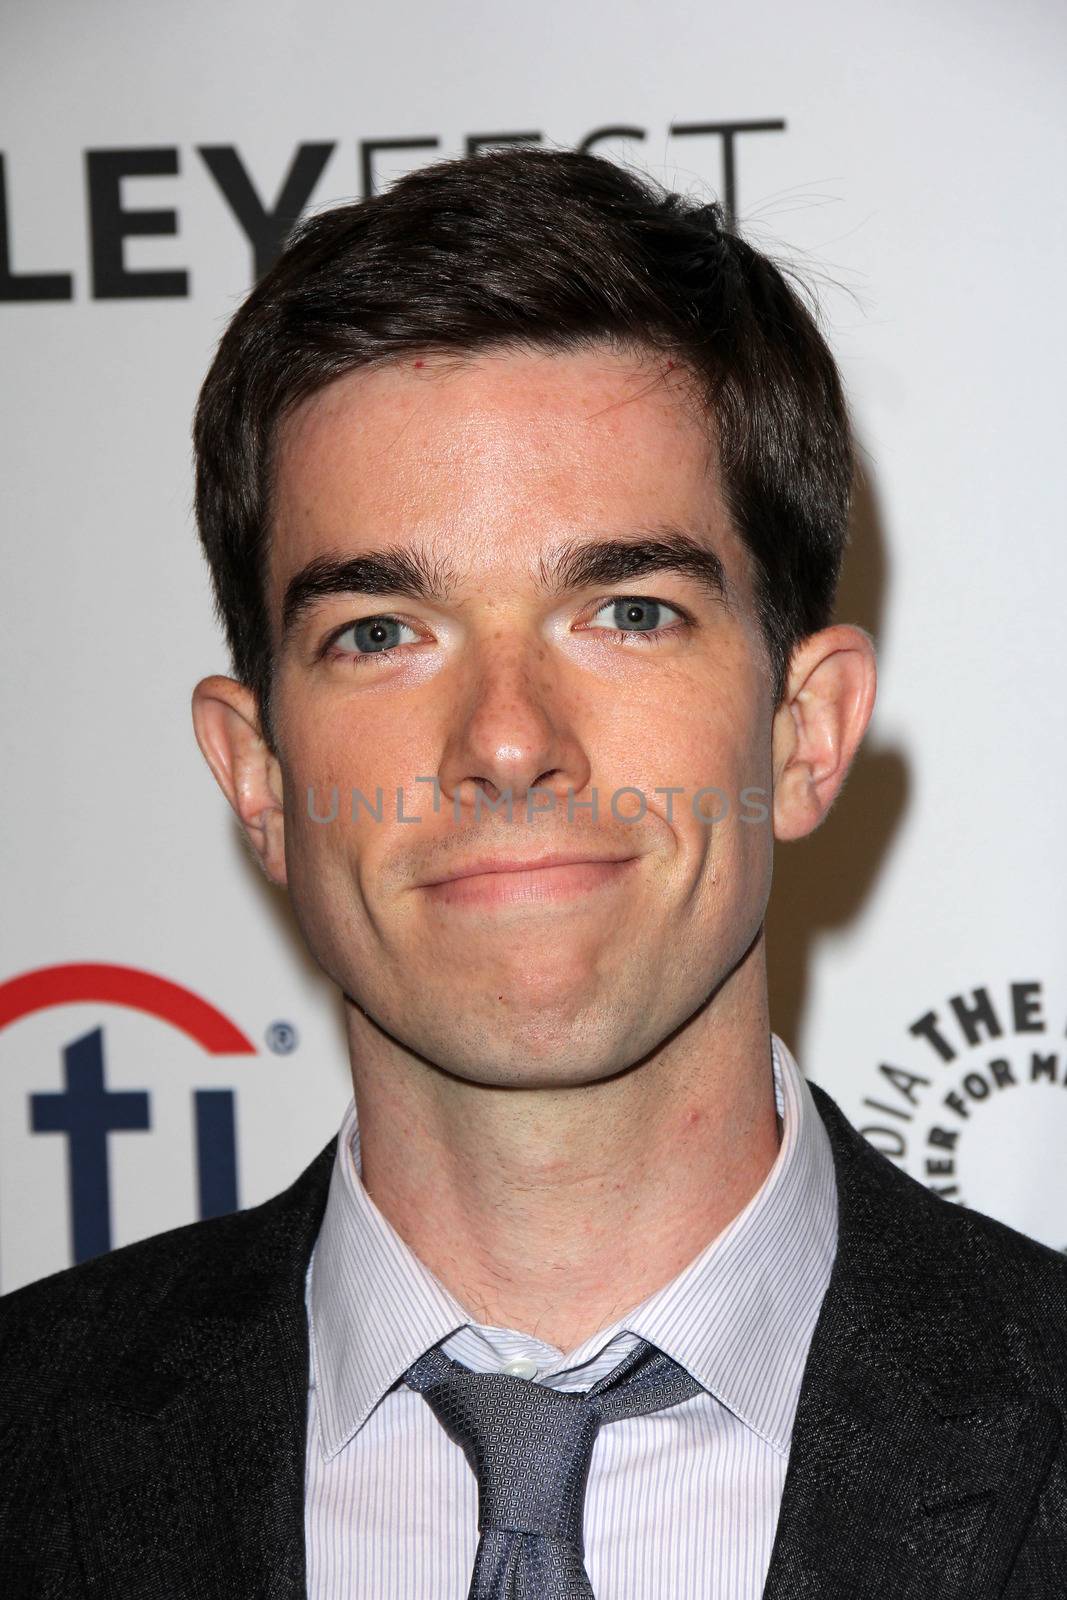 John Mulaney
Paley Center For Media's PaleyFest 2014 Fall TV Previews - FOX, Paley Center For Media, Beverly Hills, CA 09-08-14/ImageCollect by ImageCollect